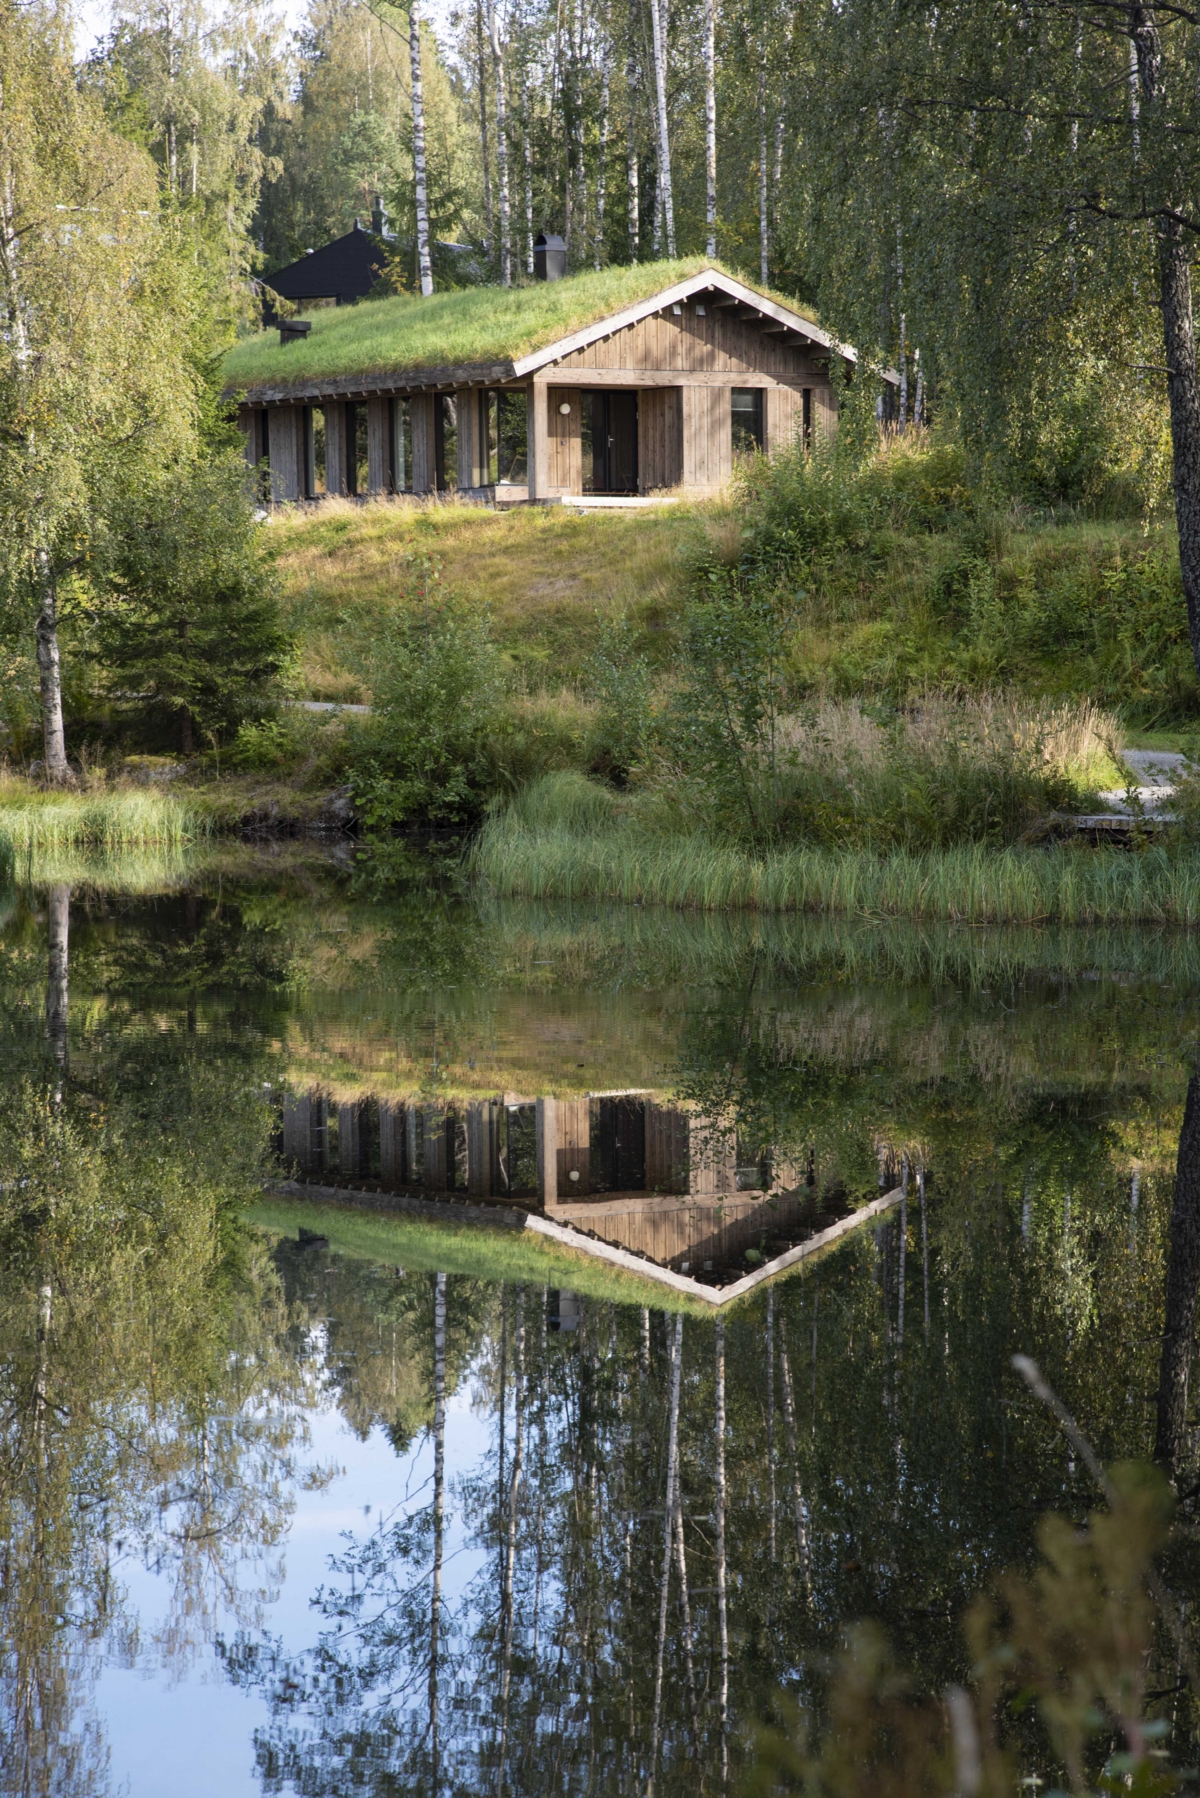 Modern cabin with turf roof reflecting in the lake.